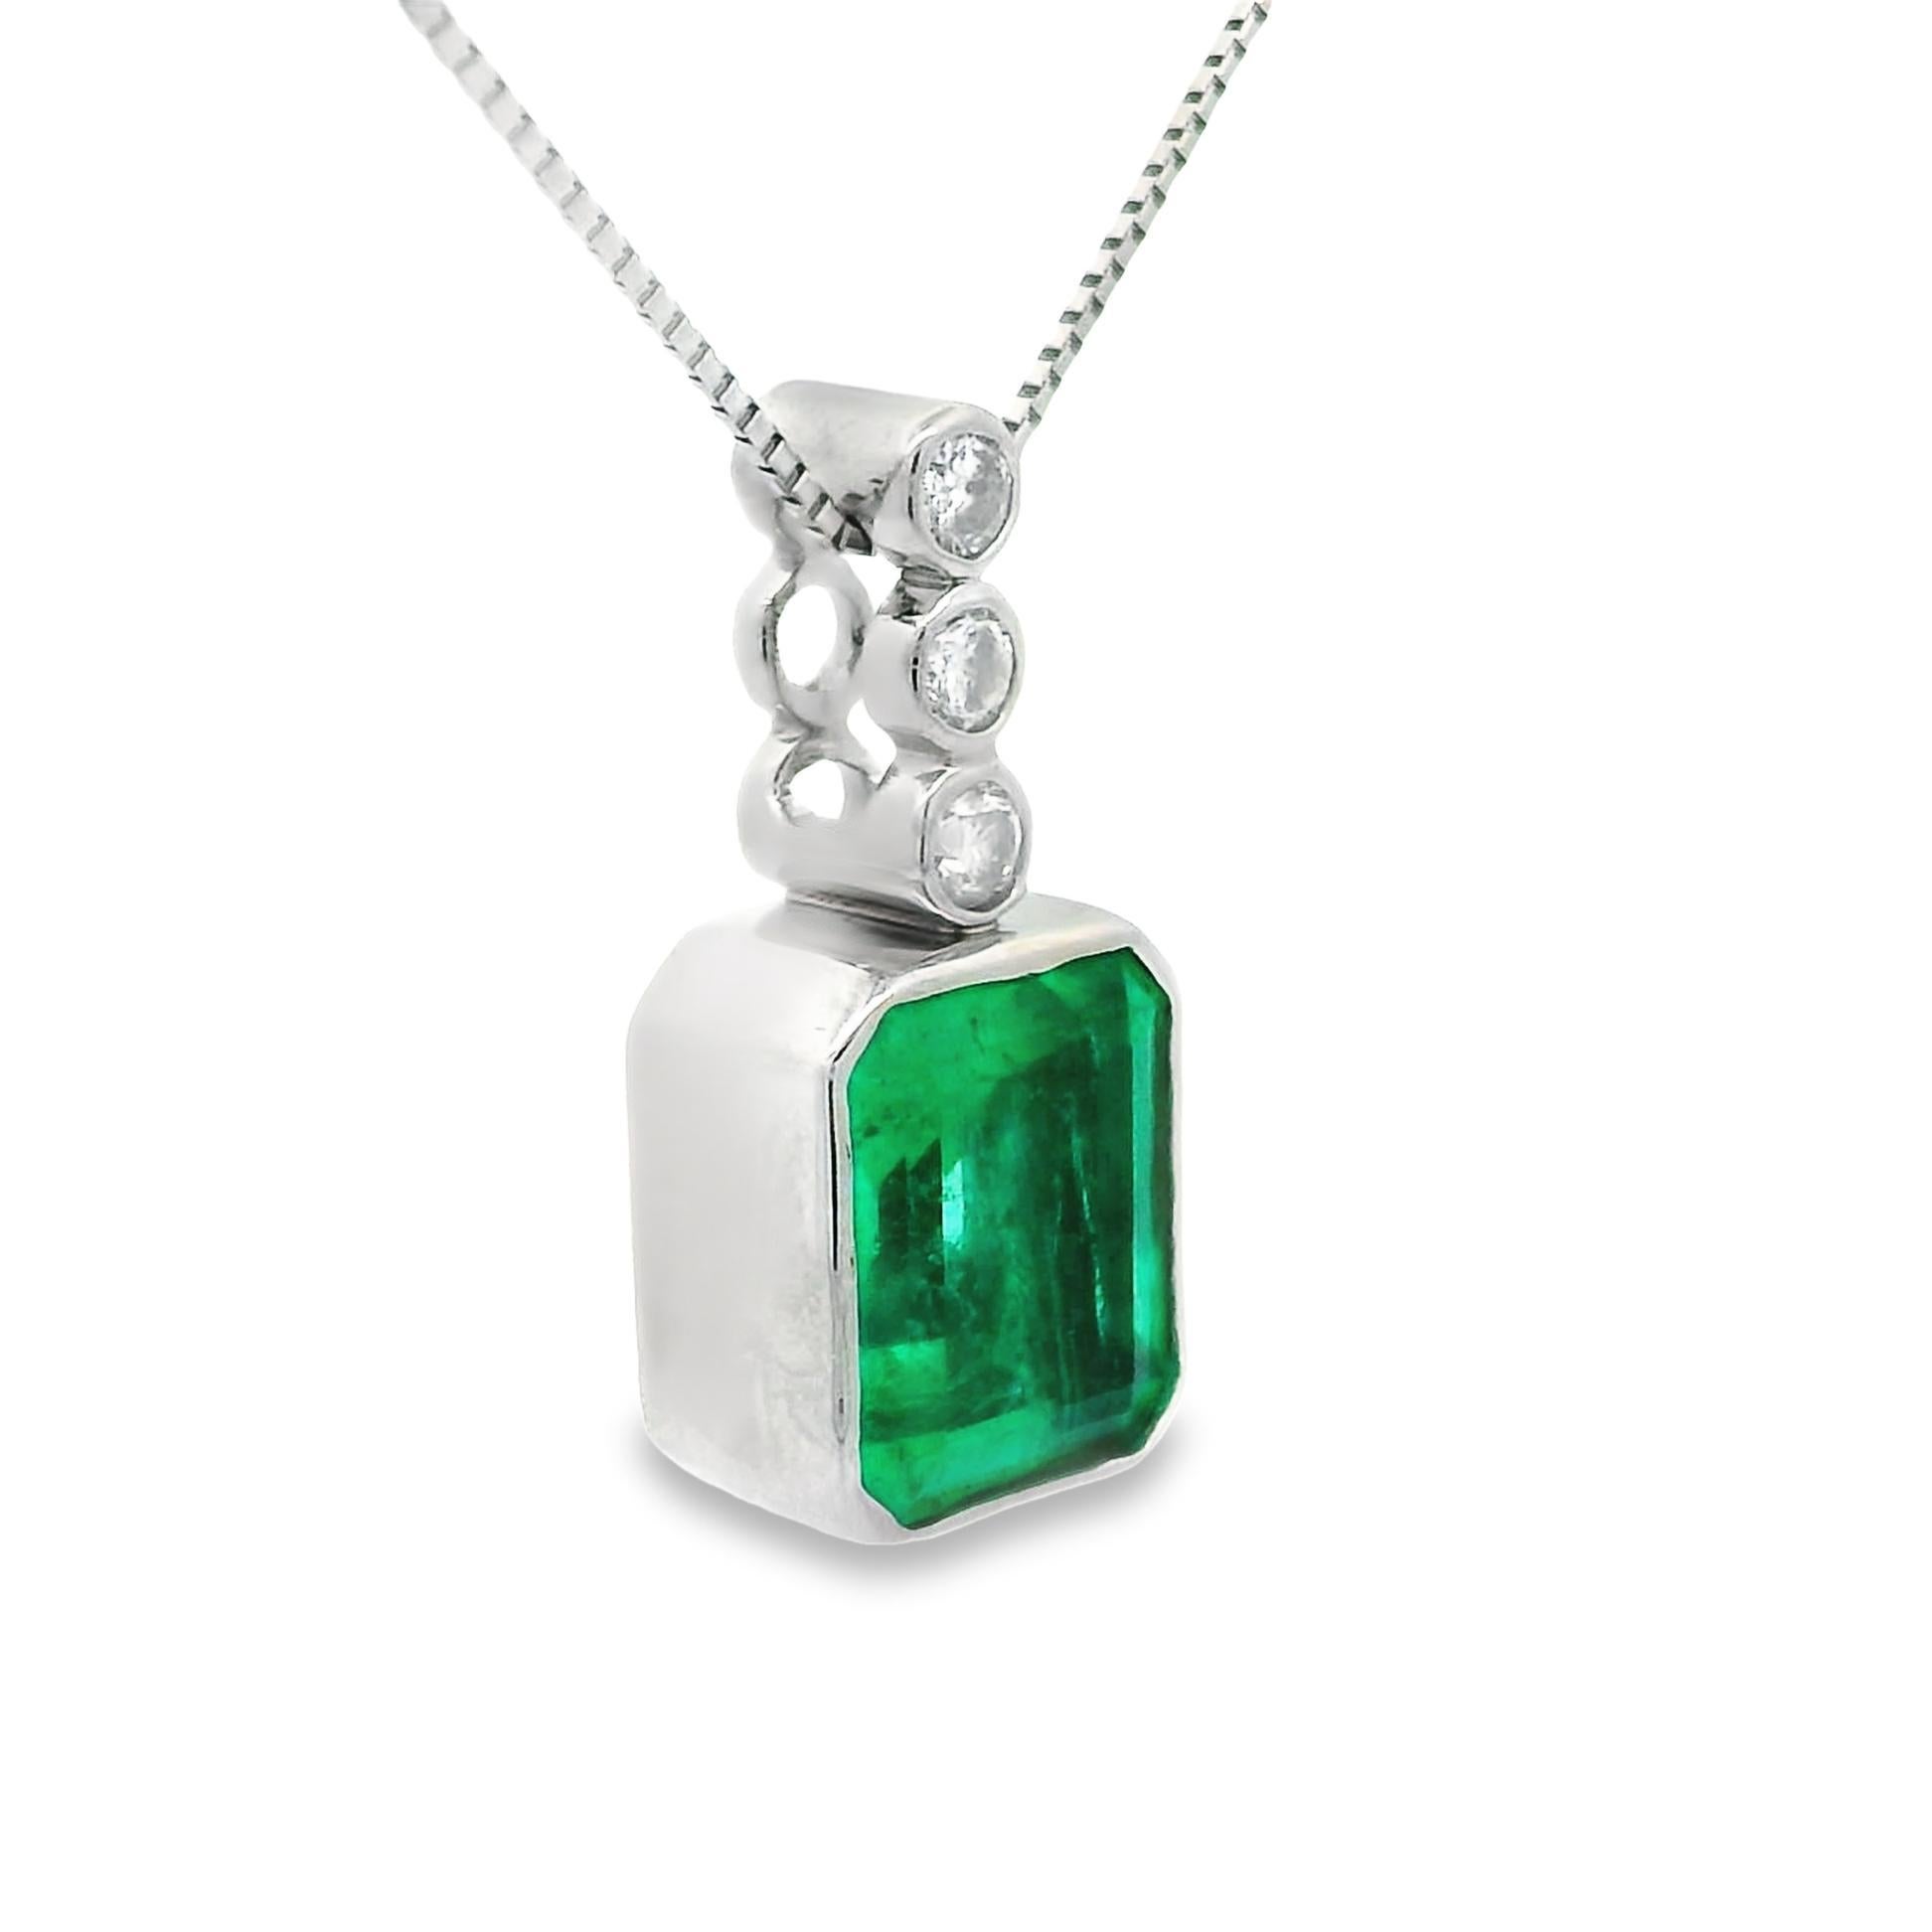 A simple yet classic emerald and diamond pendant! It features a 2.95 carat emerald-cut emerald which is bezel-set and accented by round brilliant-cut diamonds weighing 0.17 carats total. A clean and simple design that can be worn casually every day.